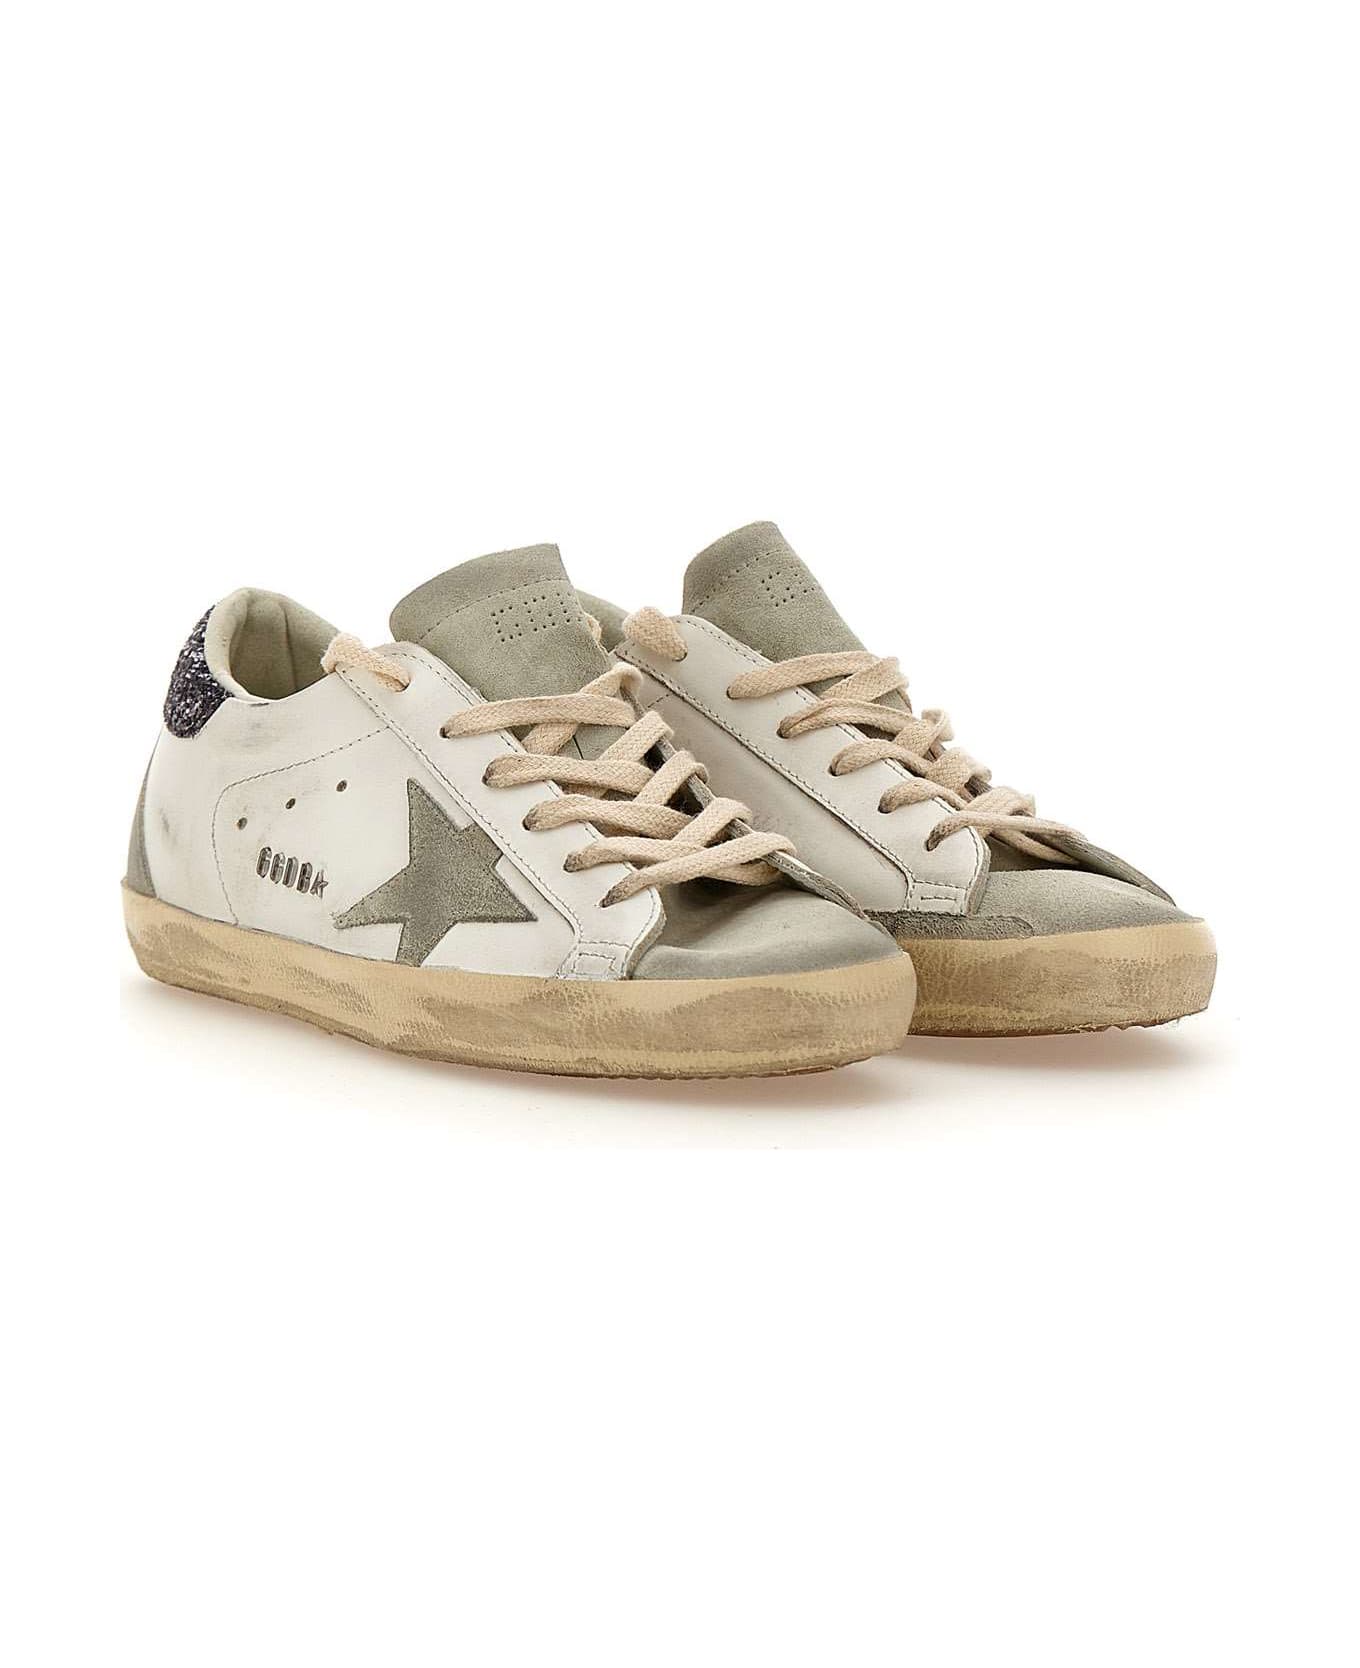 Golden Goose Super Star Classic Leather Sneakers - White/ice/grey スニーカー